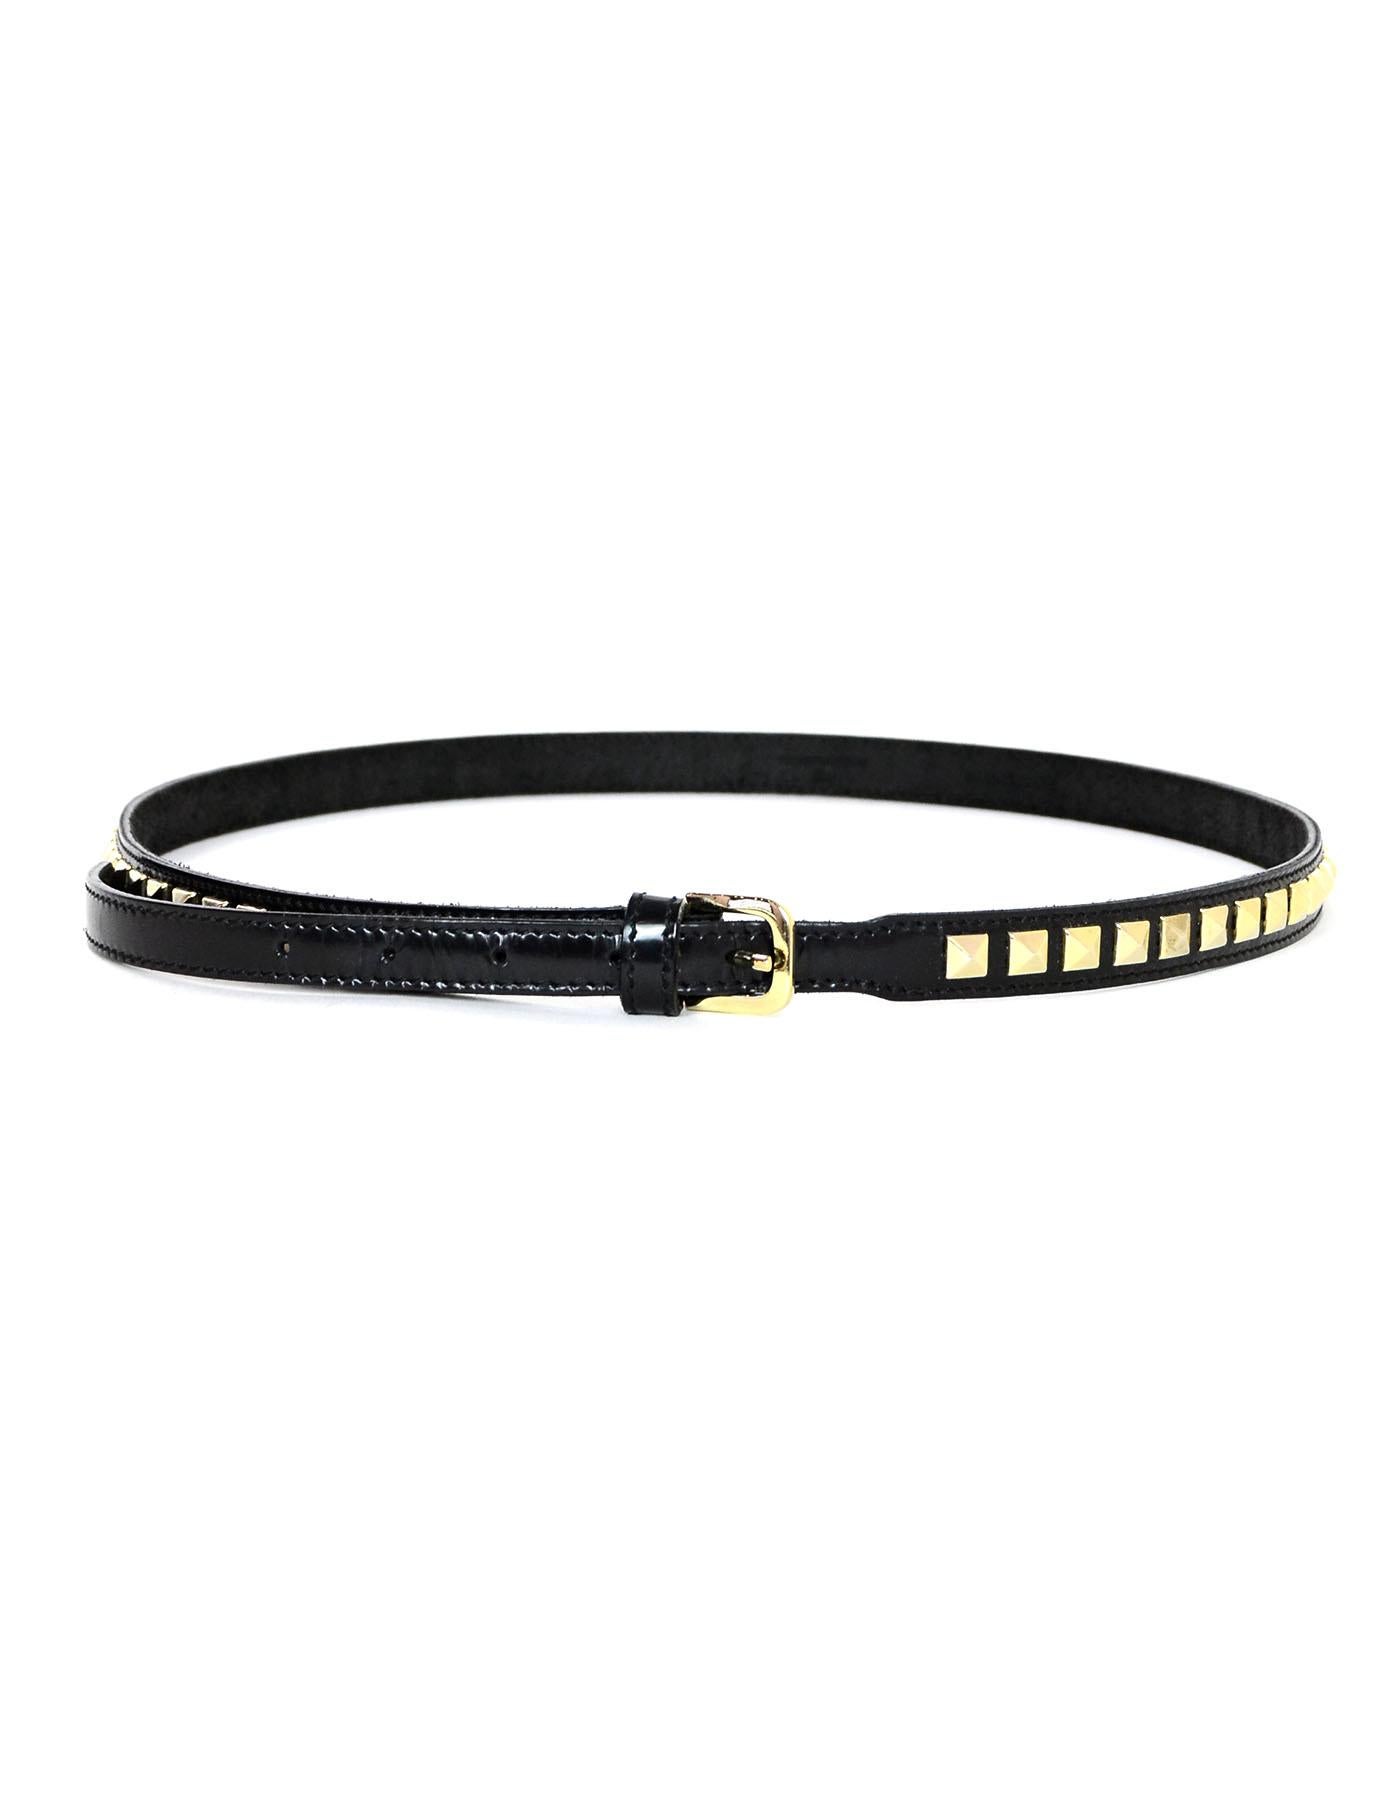 Burberry Black/Gold Glazed Leather Studded Belt

Made In: Italy
Materials: Glazed leather, metal
Colors: Black, gold
Overall Condition: Excellent pre-owned condition, light creasing to leather without studs
Includes: Burberry dustbag

Measurements: